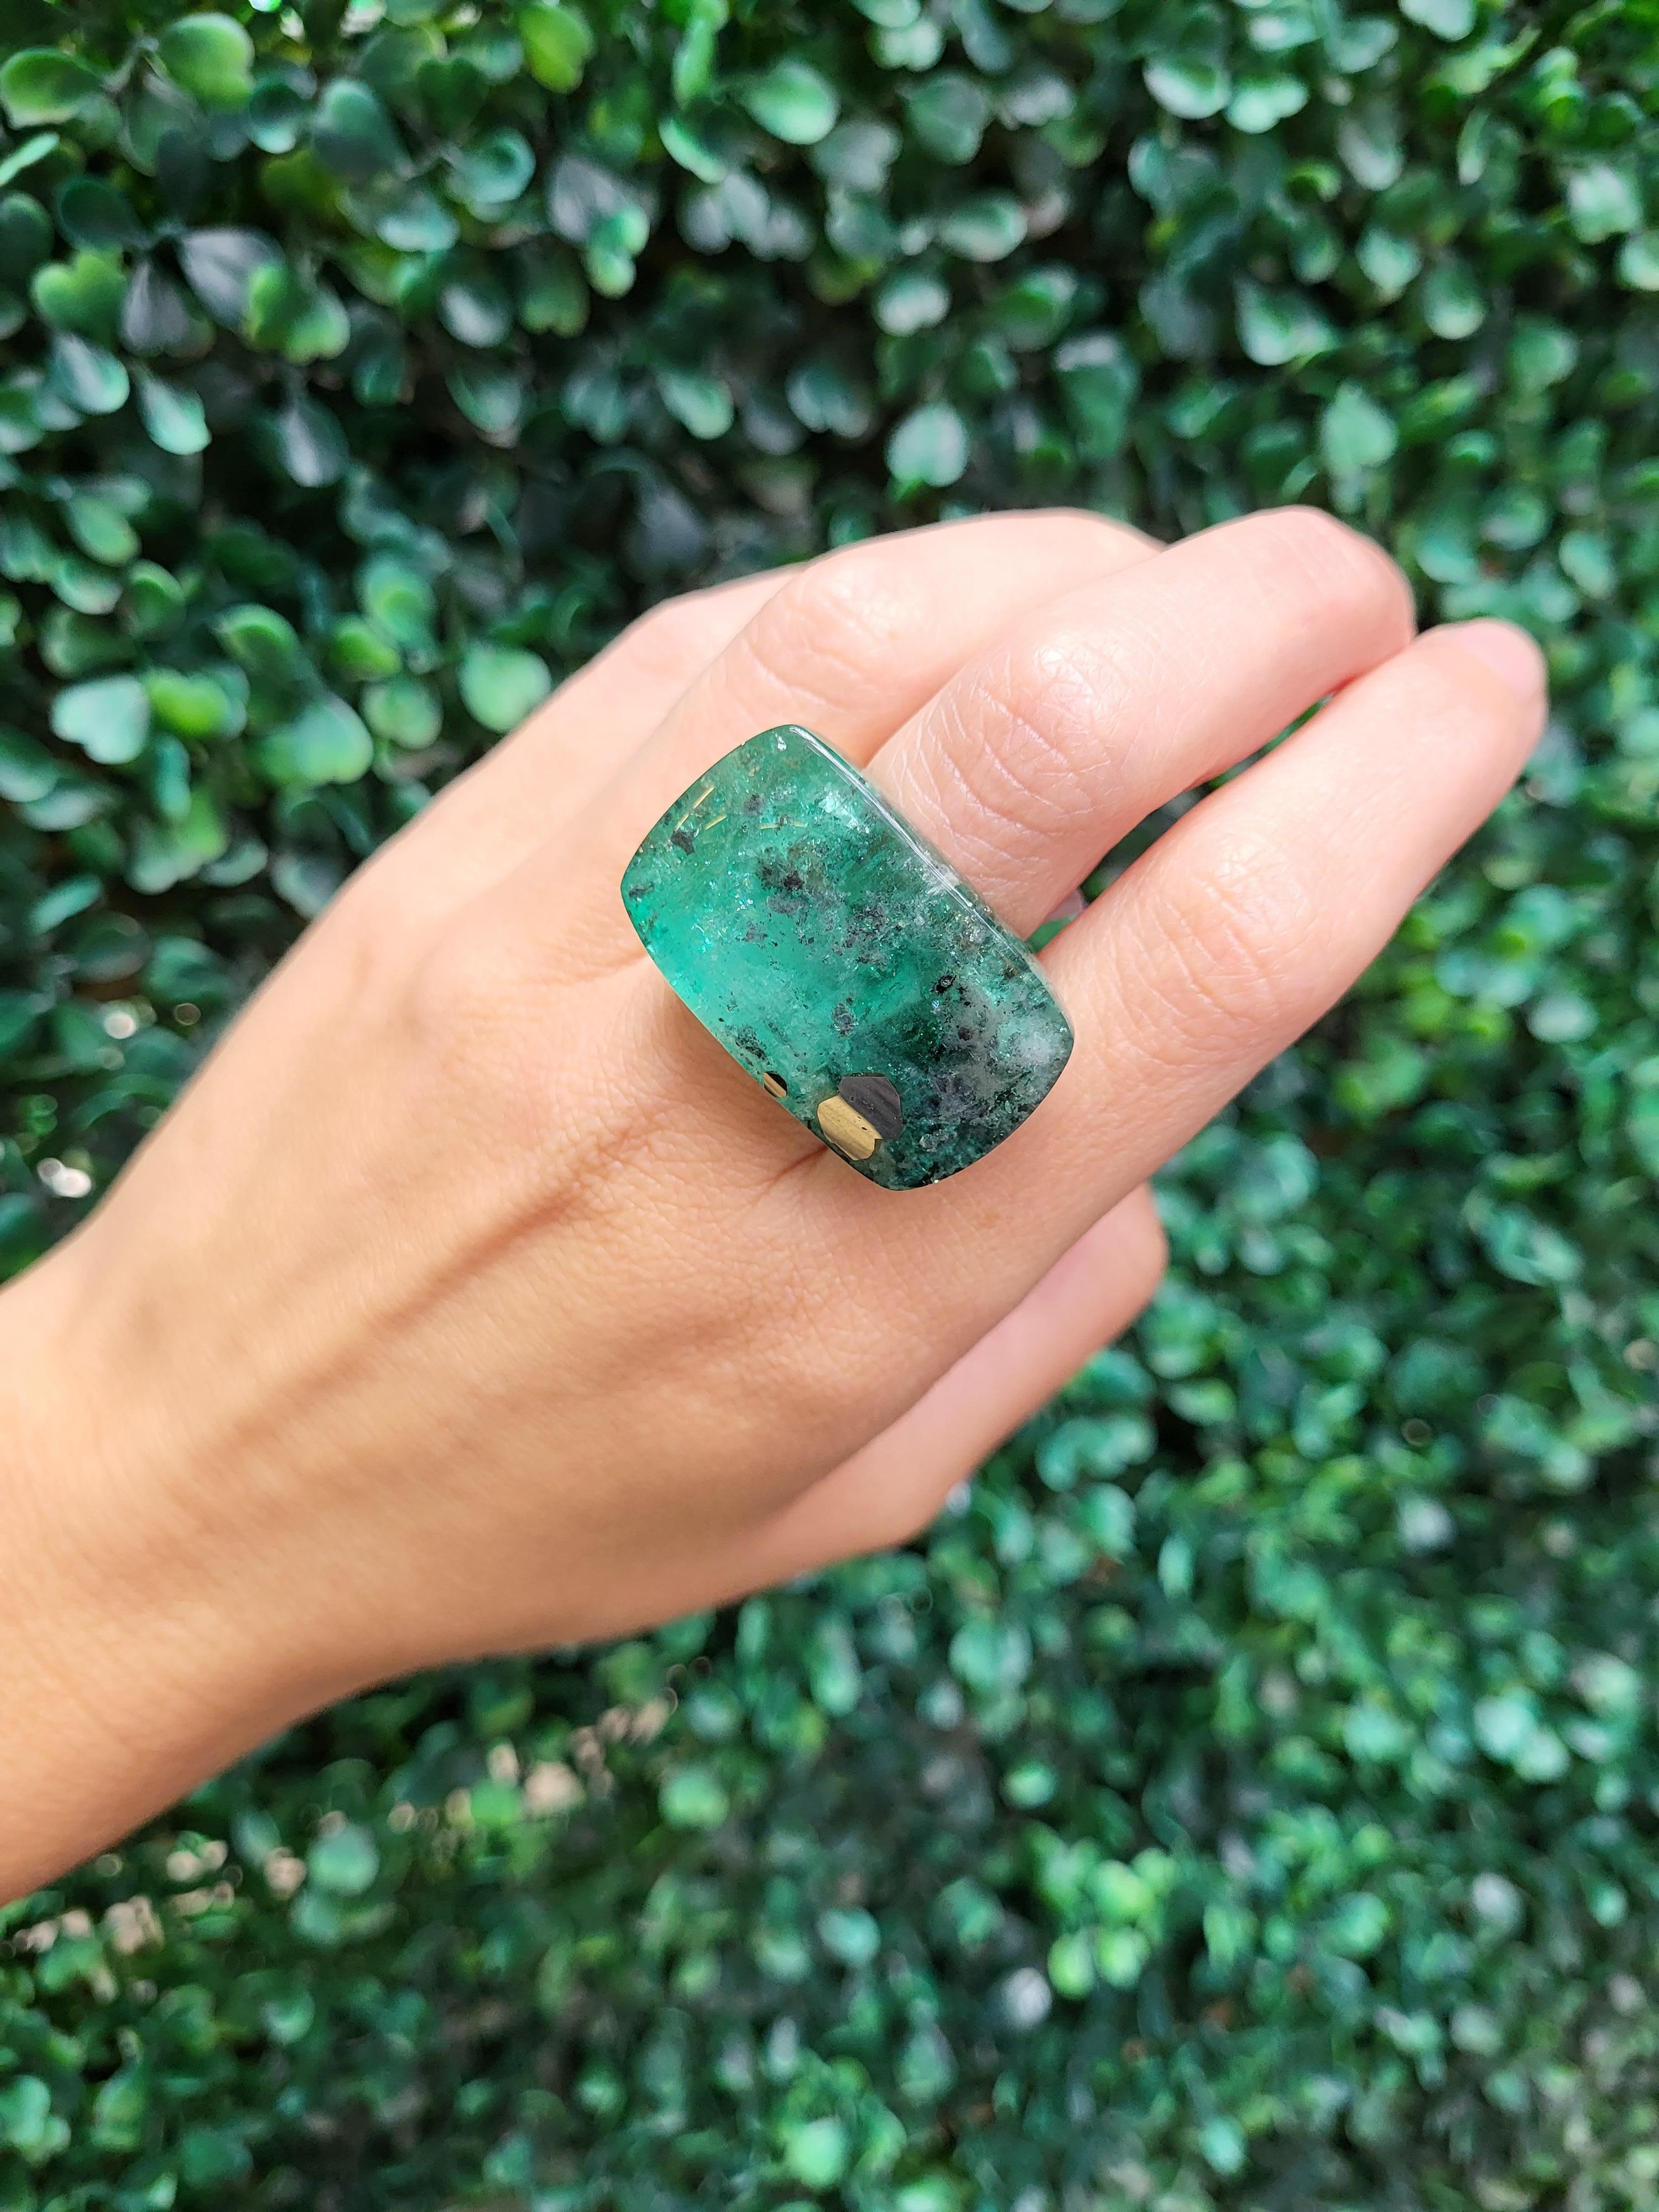 30 Carat Columbian Emerald Ring with Pyrite Inclusion For Sale 11